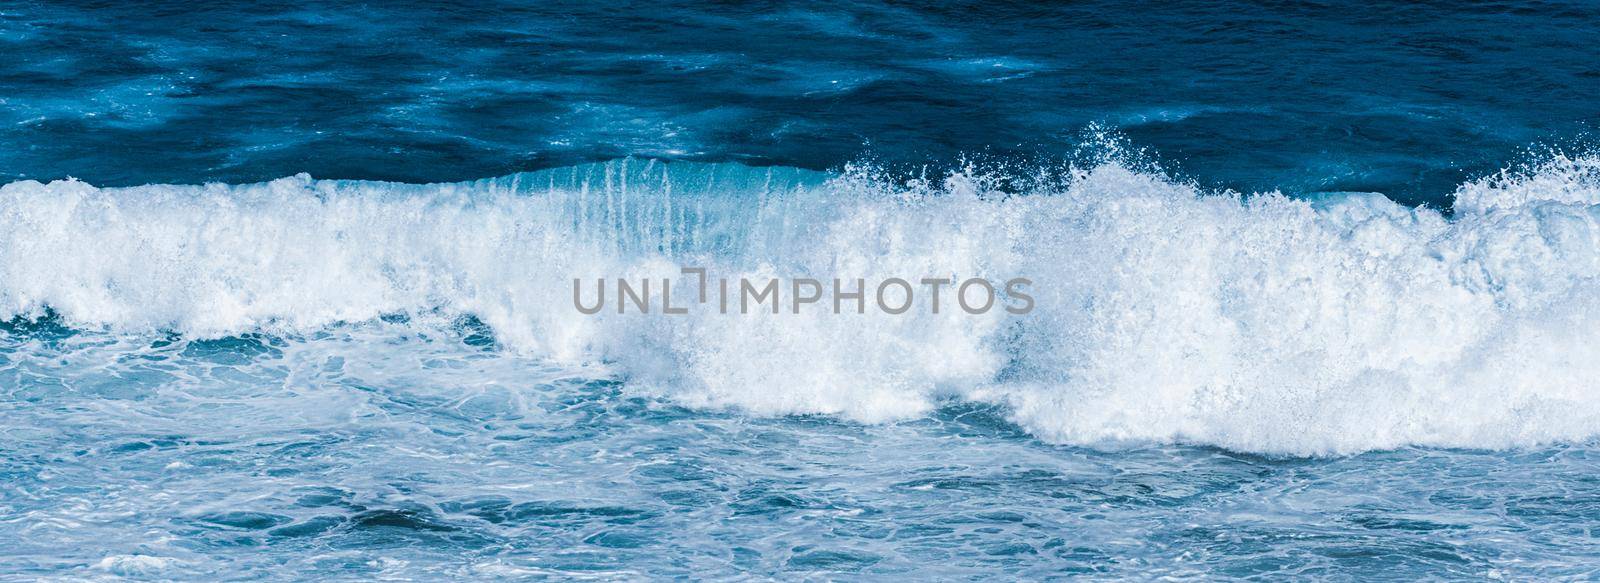 Ocean waves as coastal background, beach holiday destination and luxury travel concept